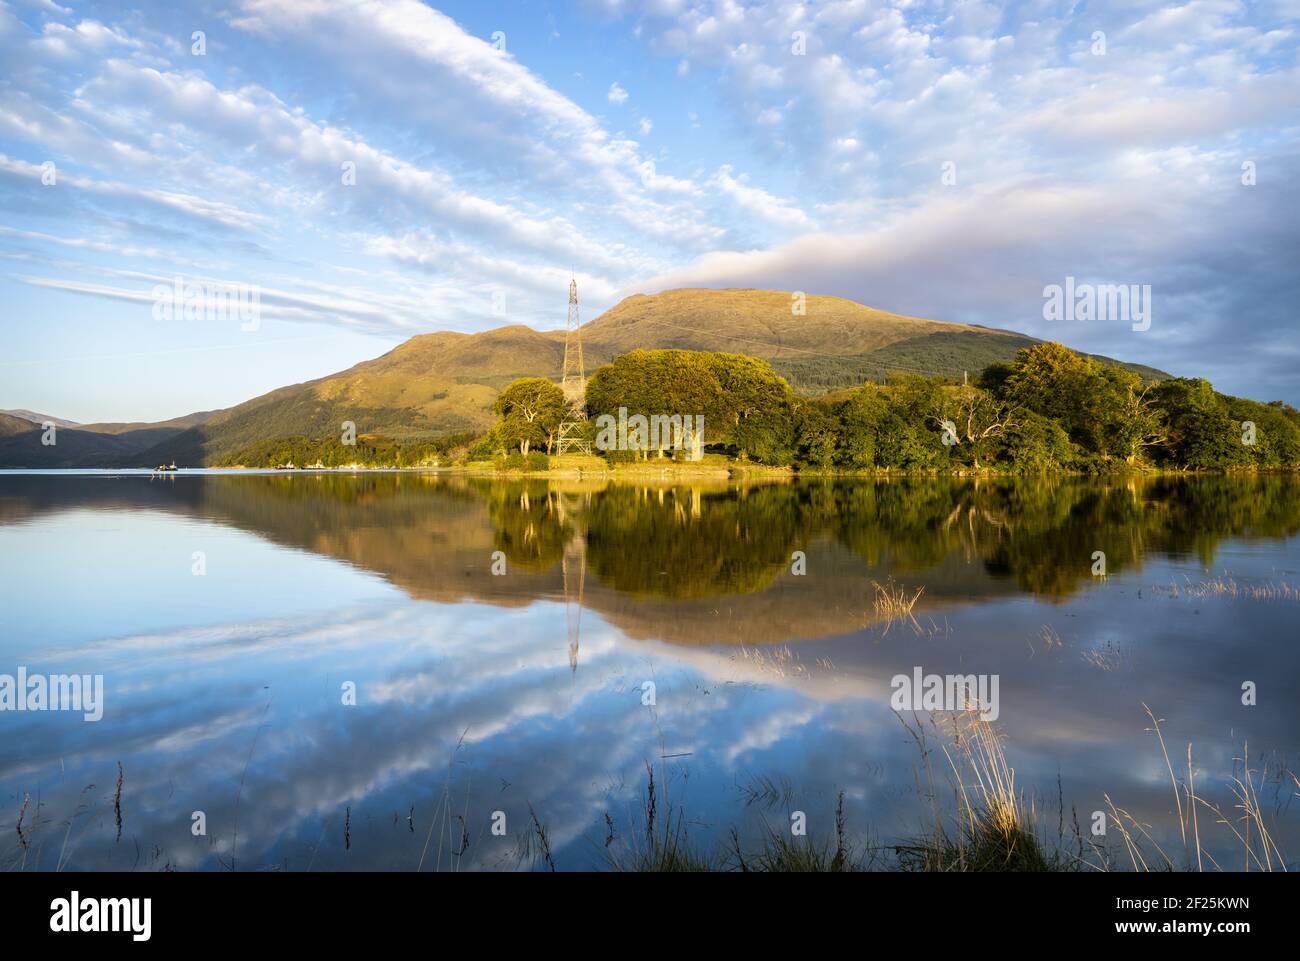 Loch Etive & River Awe with reflections, Scotland Stock Photo